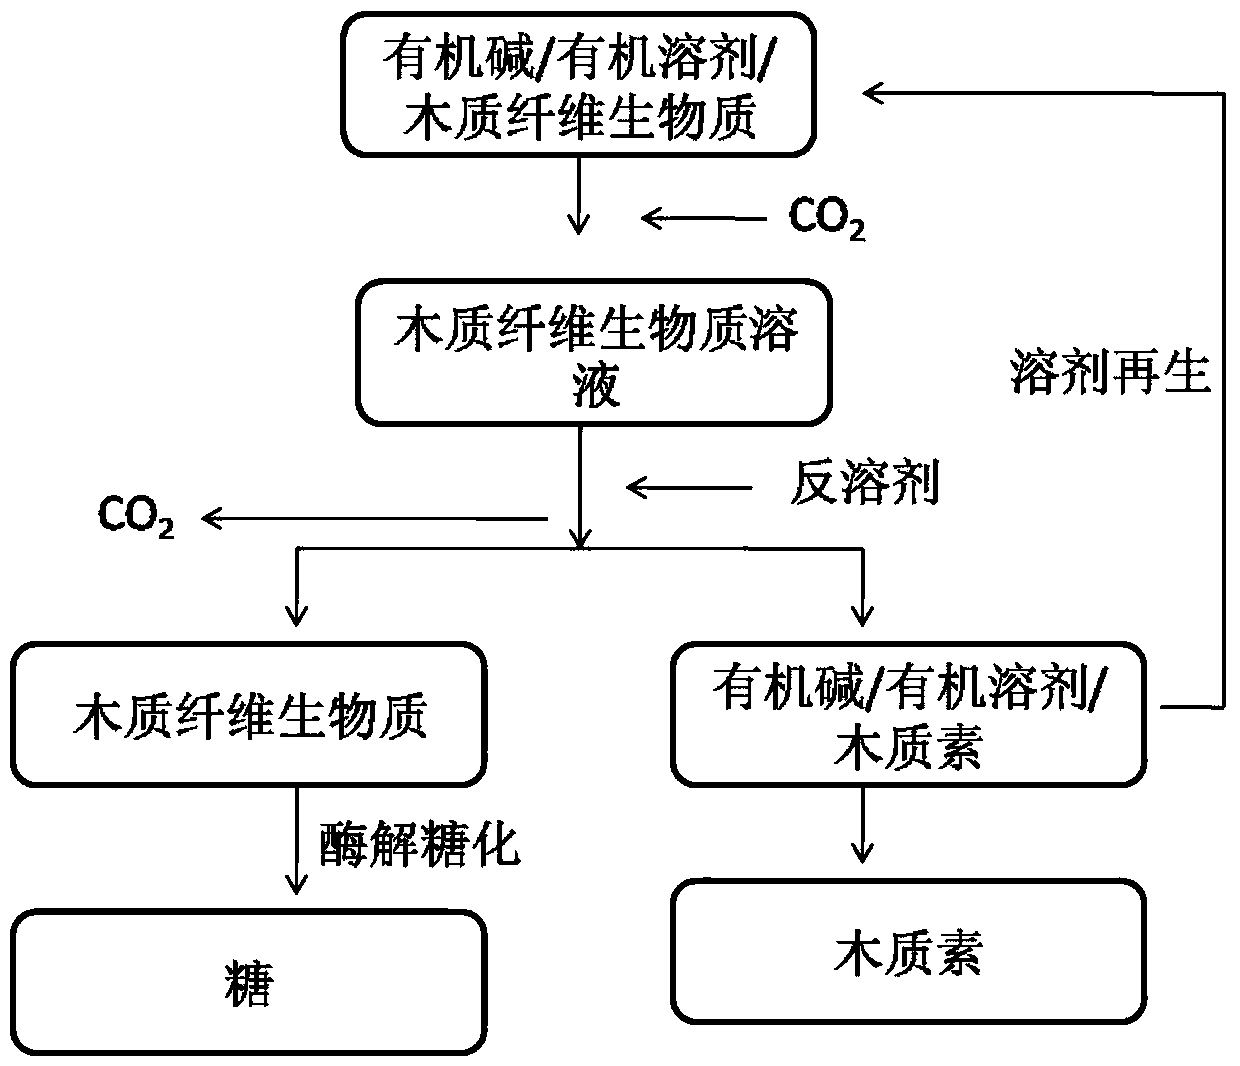 Method for improving sugar yield of lignocellulosic biomass after enzymolysis